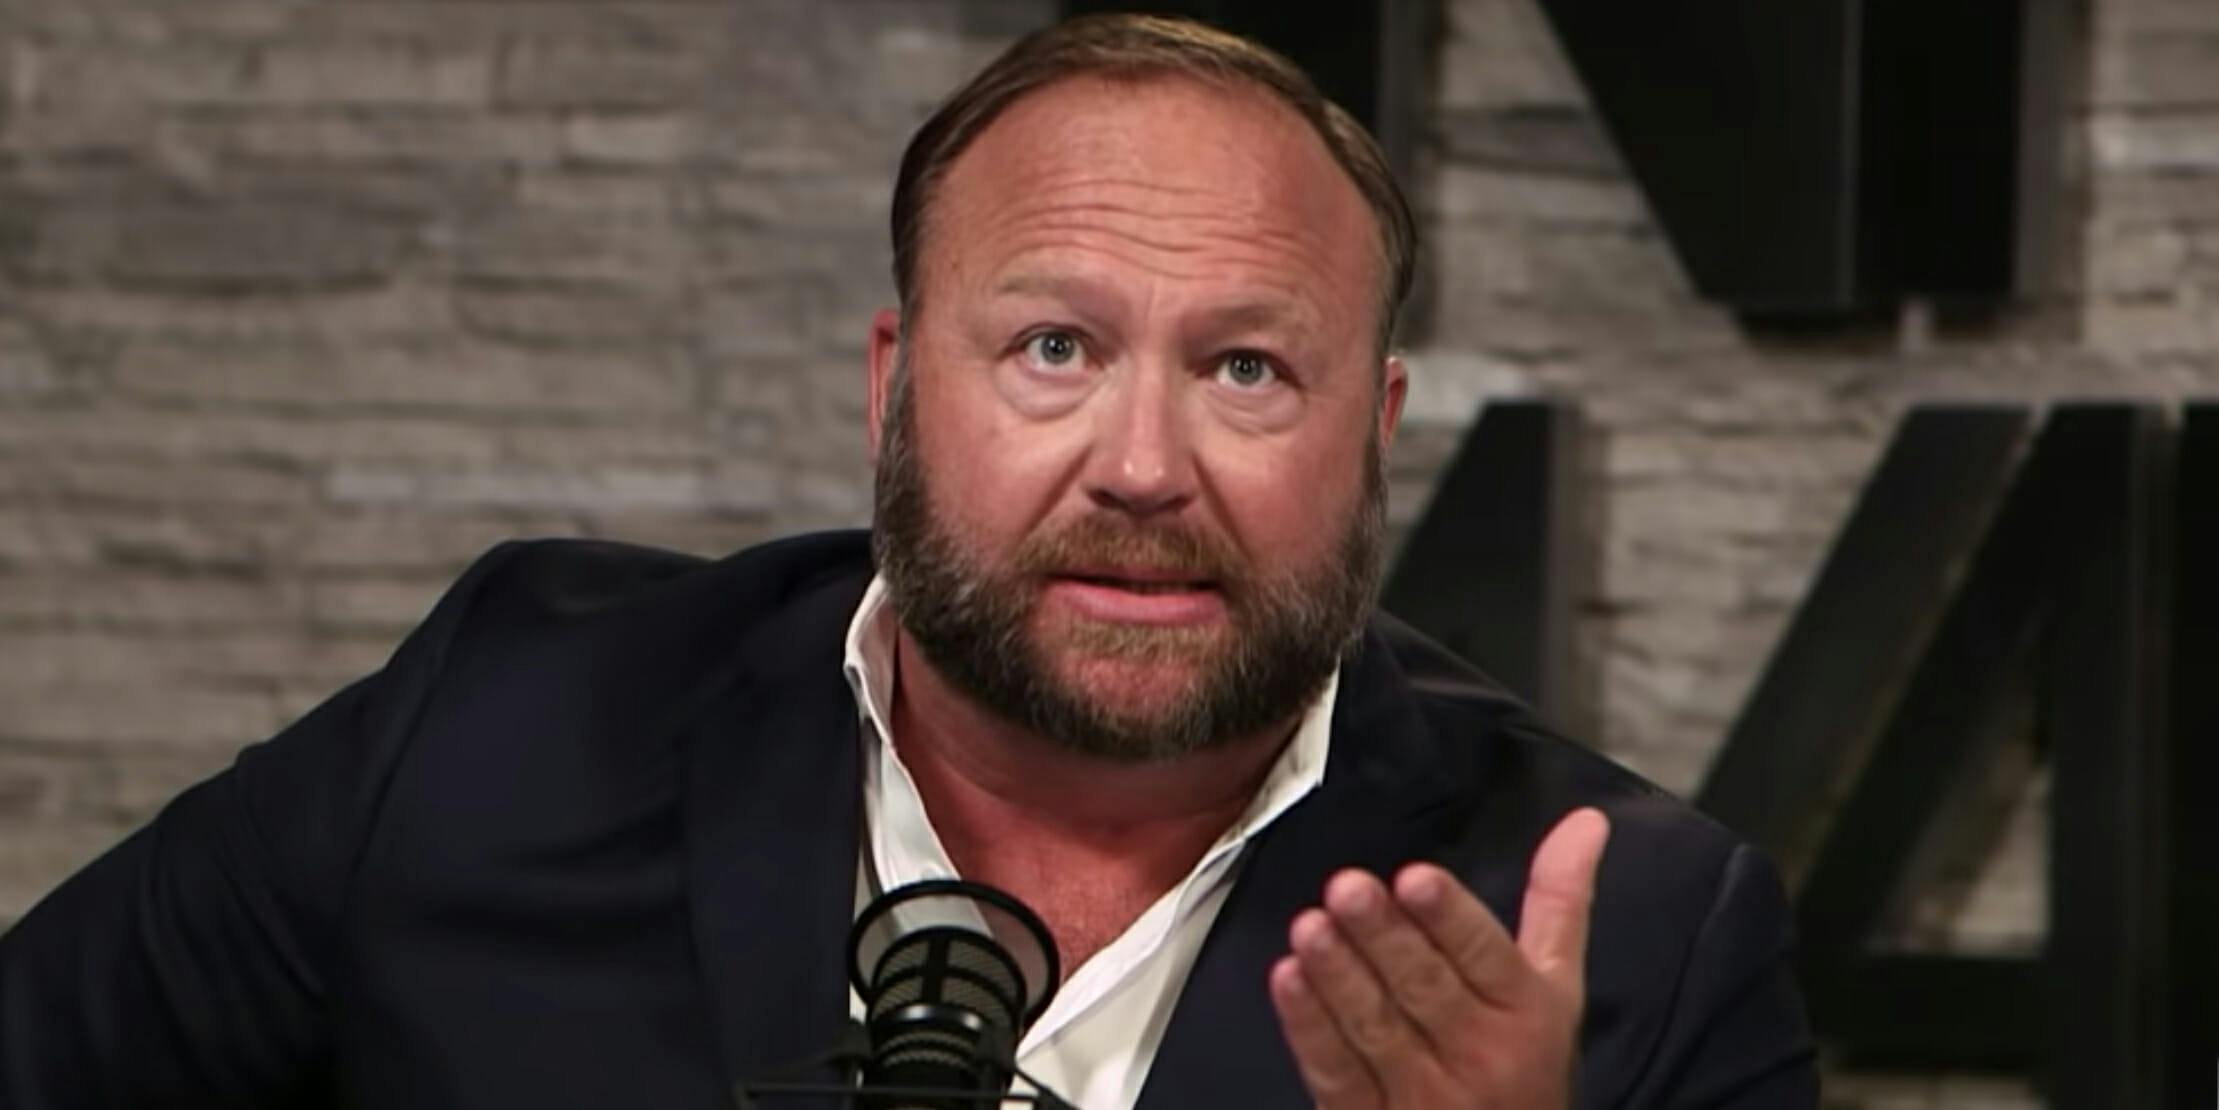 InfoWars accidentally sent child porn to lawyers representing Sandy Hook parents